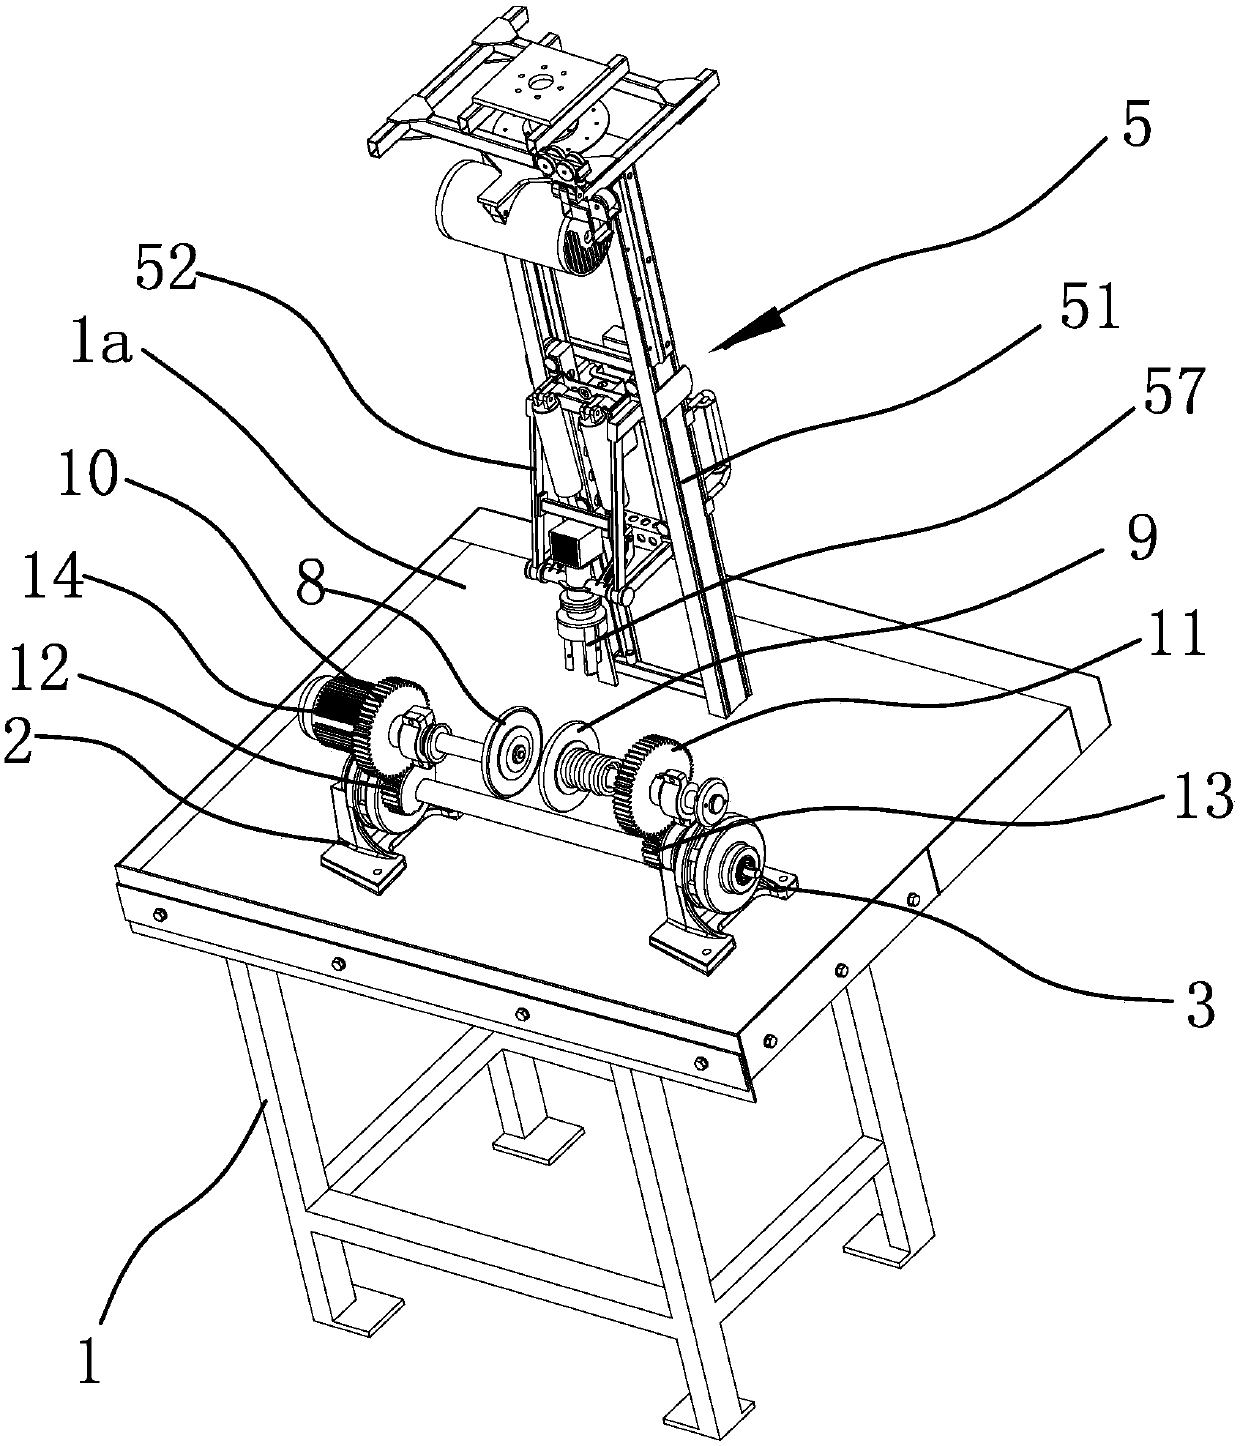 An automatic sharpening device